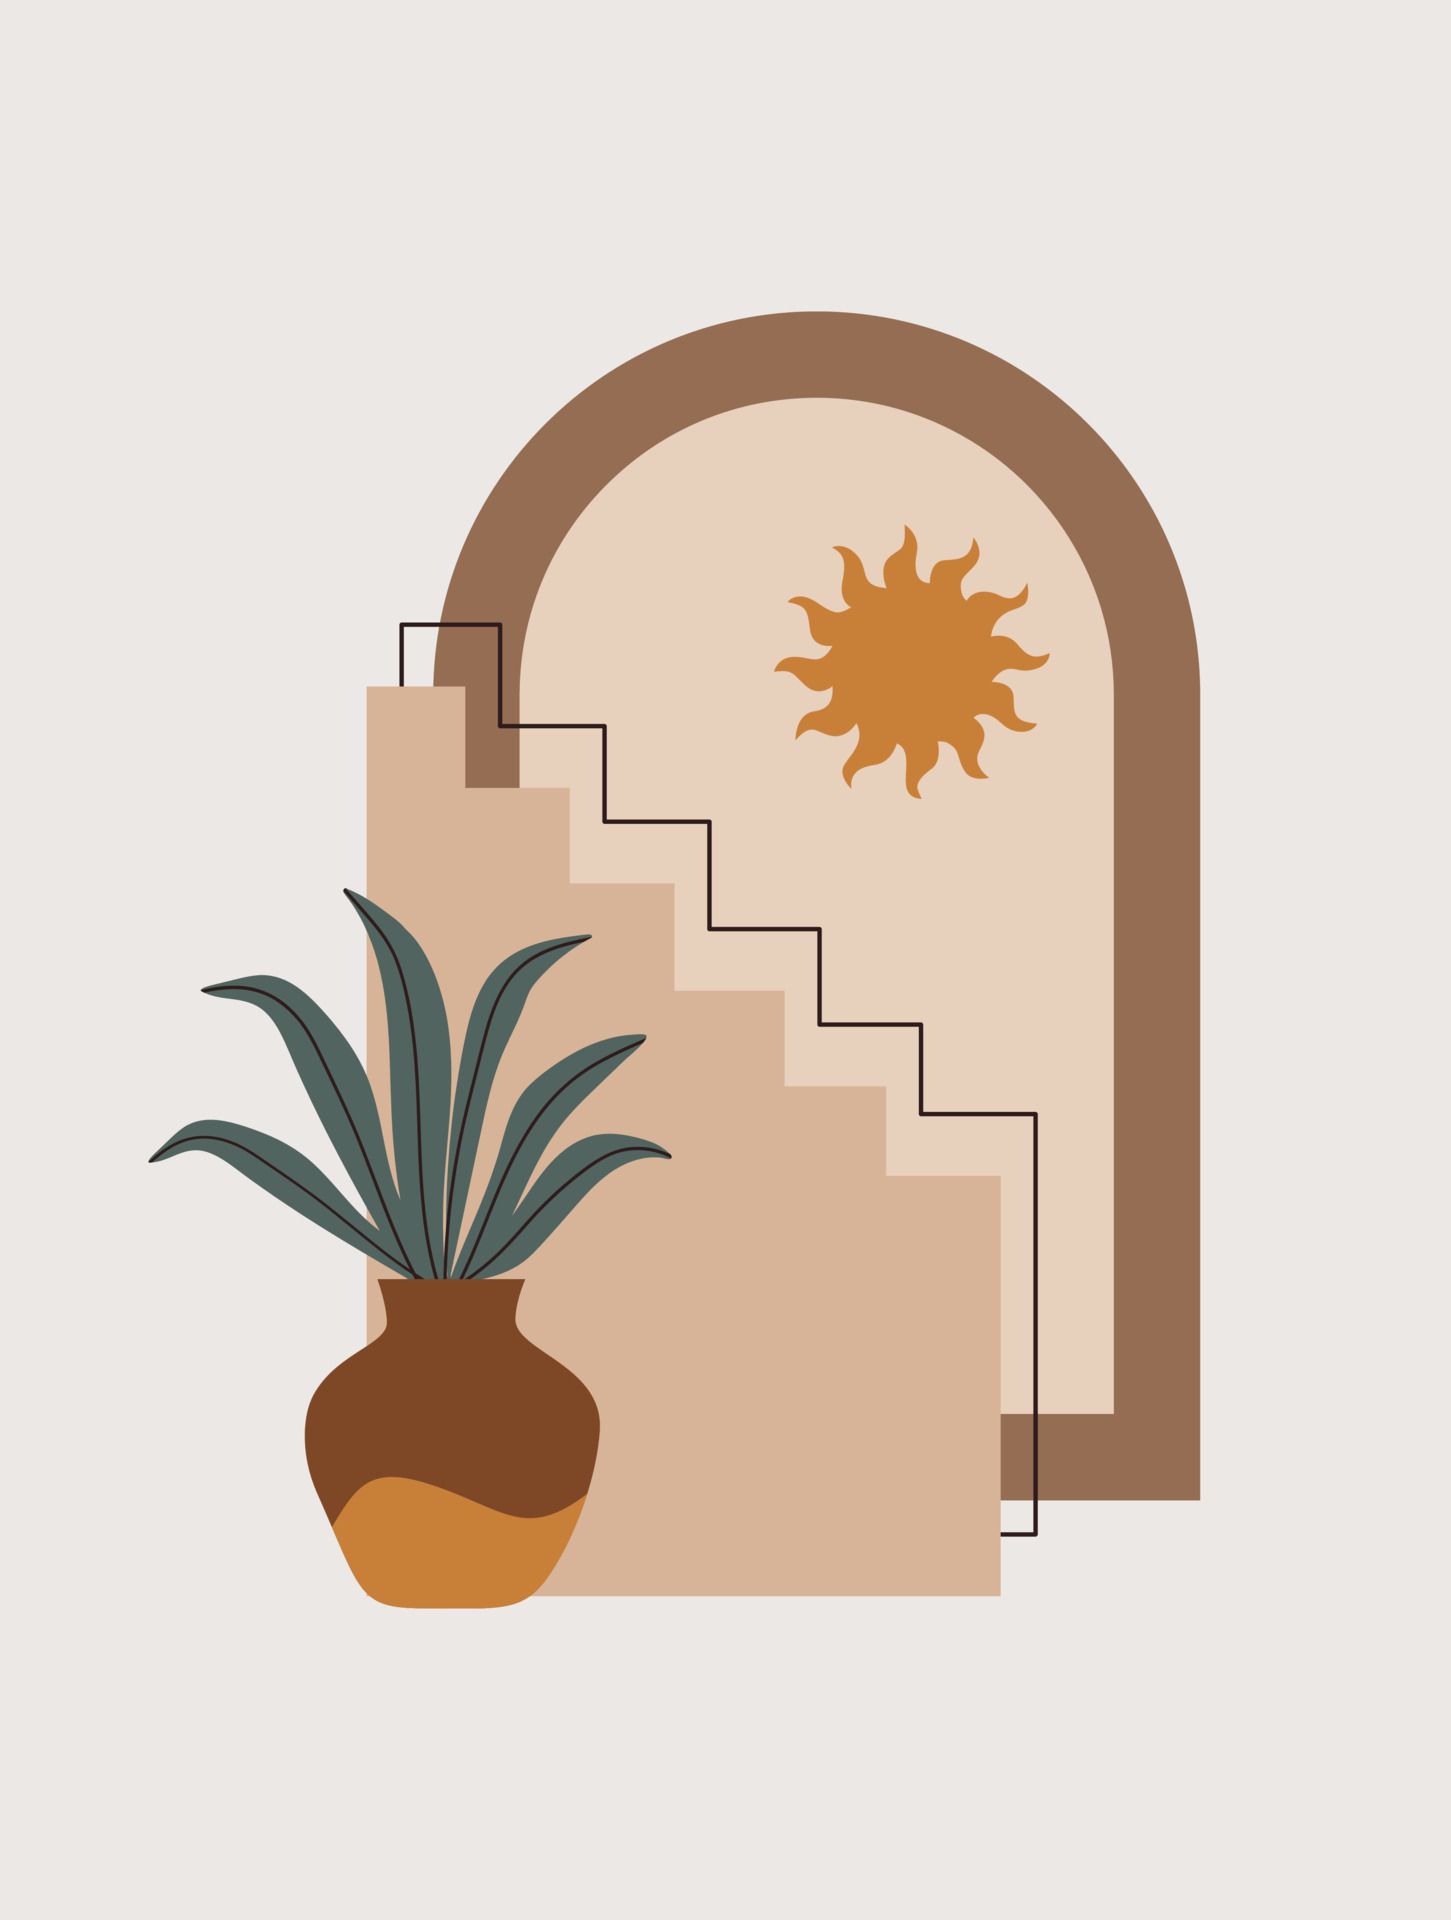 Abstrakt Hintergrundbild 1451x1920. Modern abstract aesthetic background of geometric shapes, vase, stairs and plants. Wall decor in boho style. Mid century vector print for cover, wallpaper, card, social media, interior decor 7068156 Vector Art